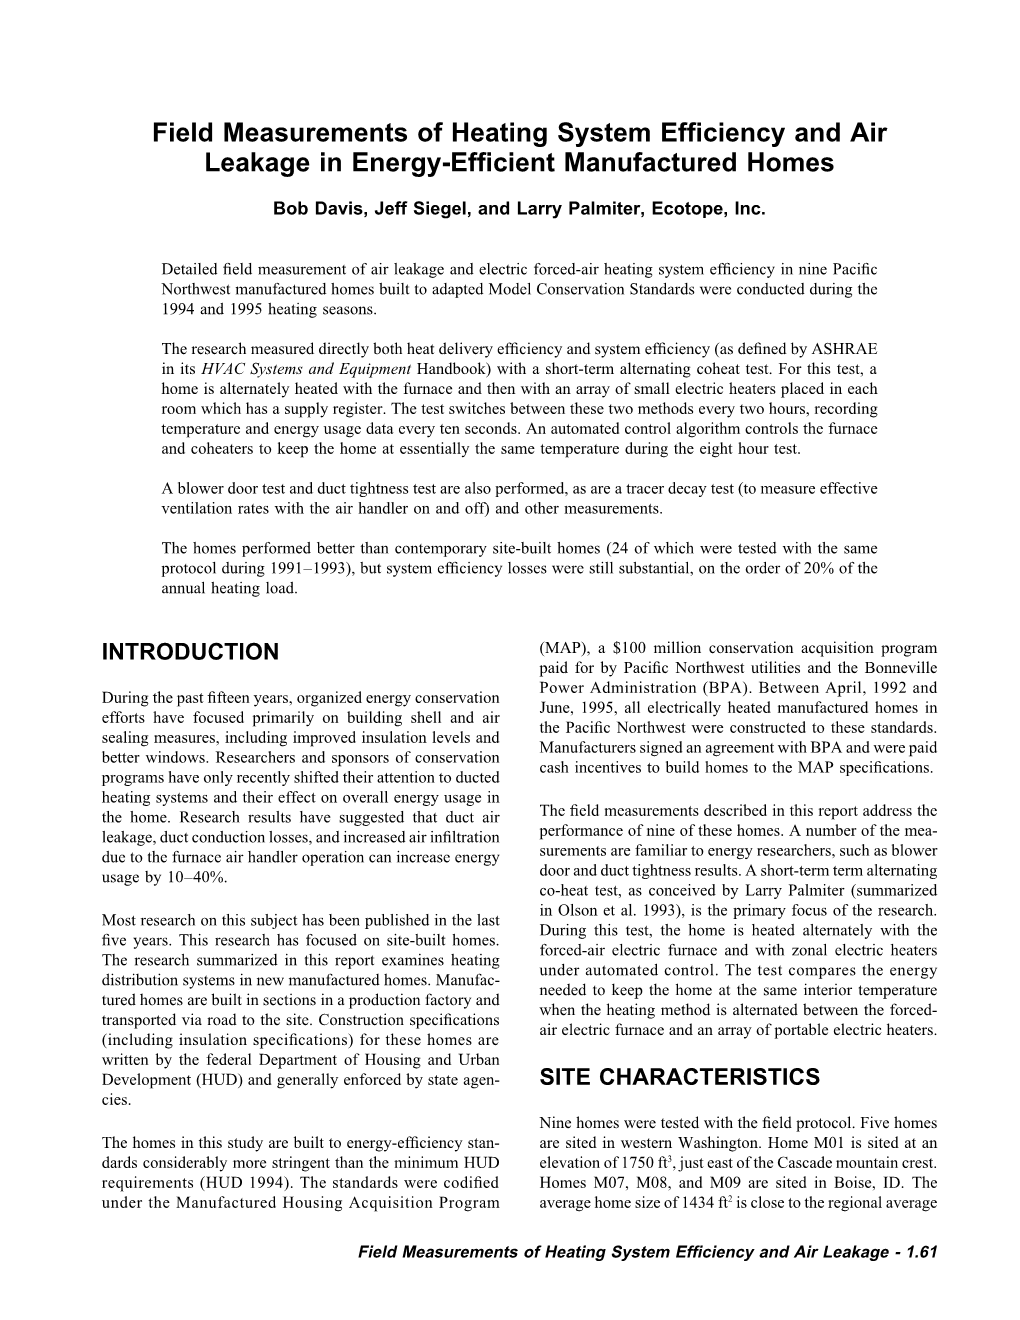 Field Measurements of Heating System Efficiency and Air Leakage in Energy-Efficient Manufactured Homes